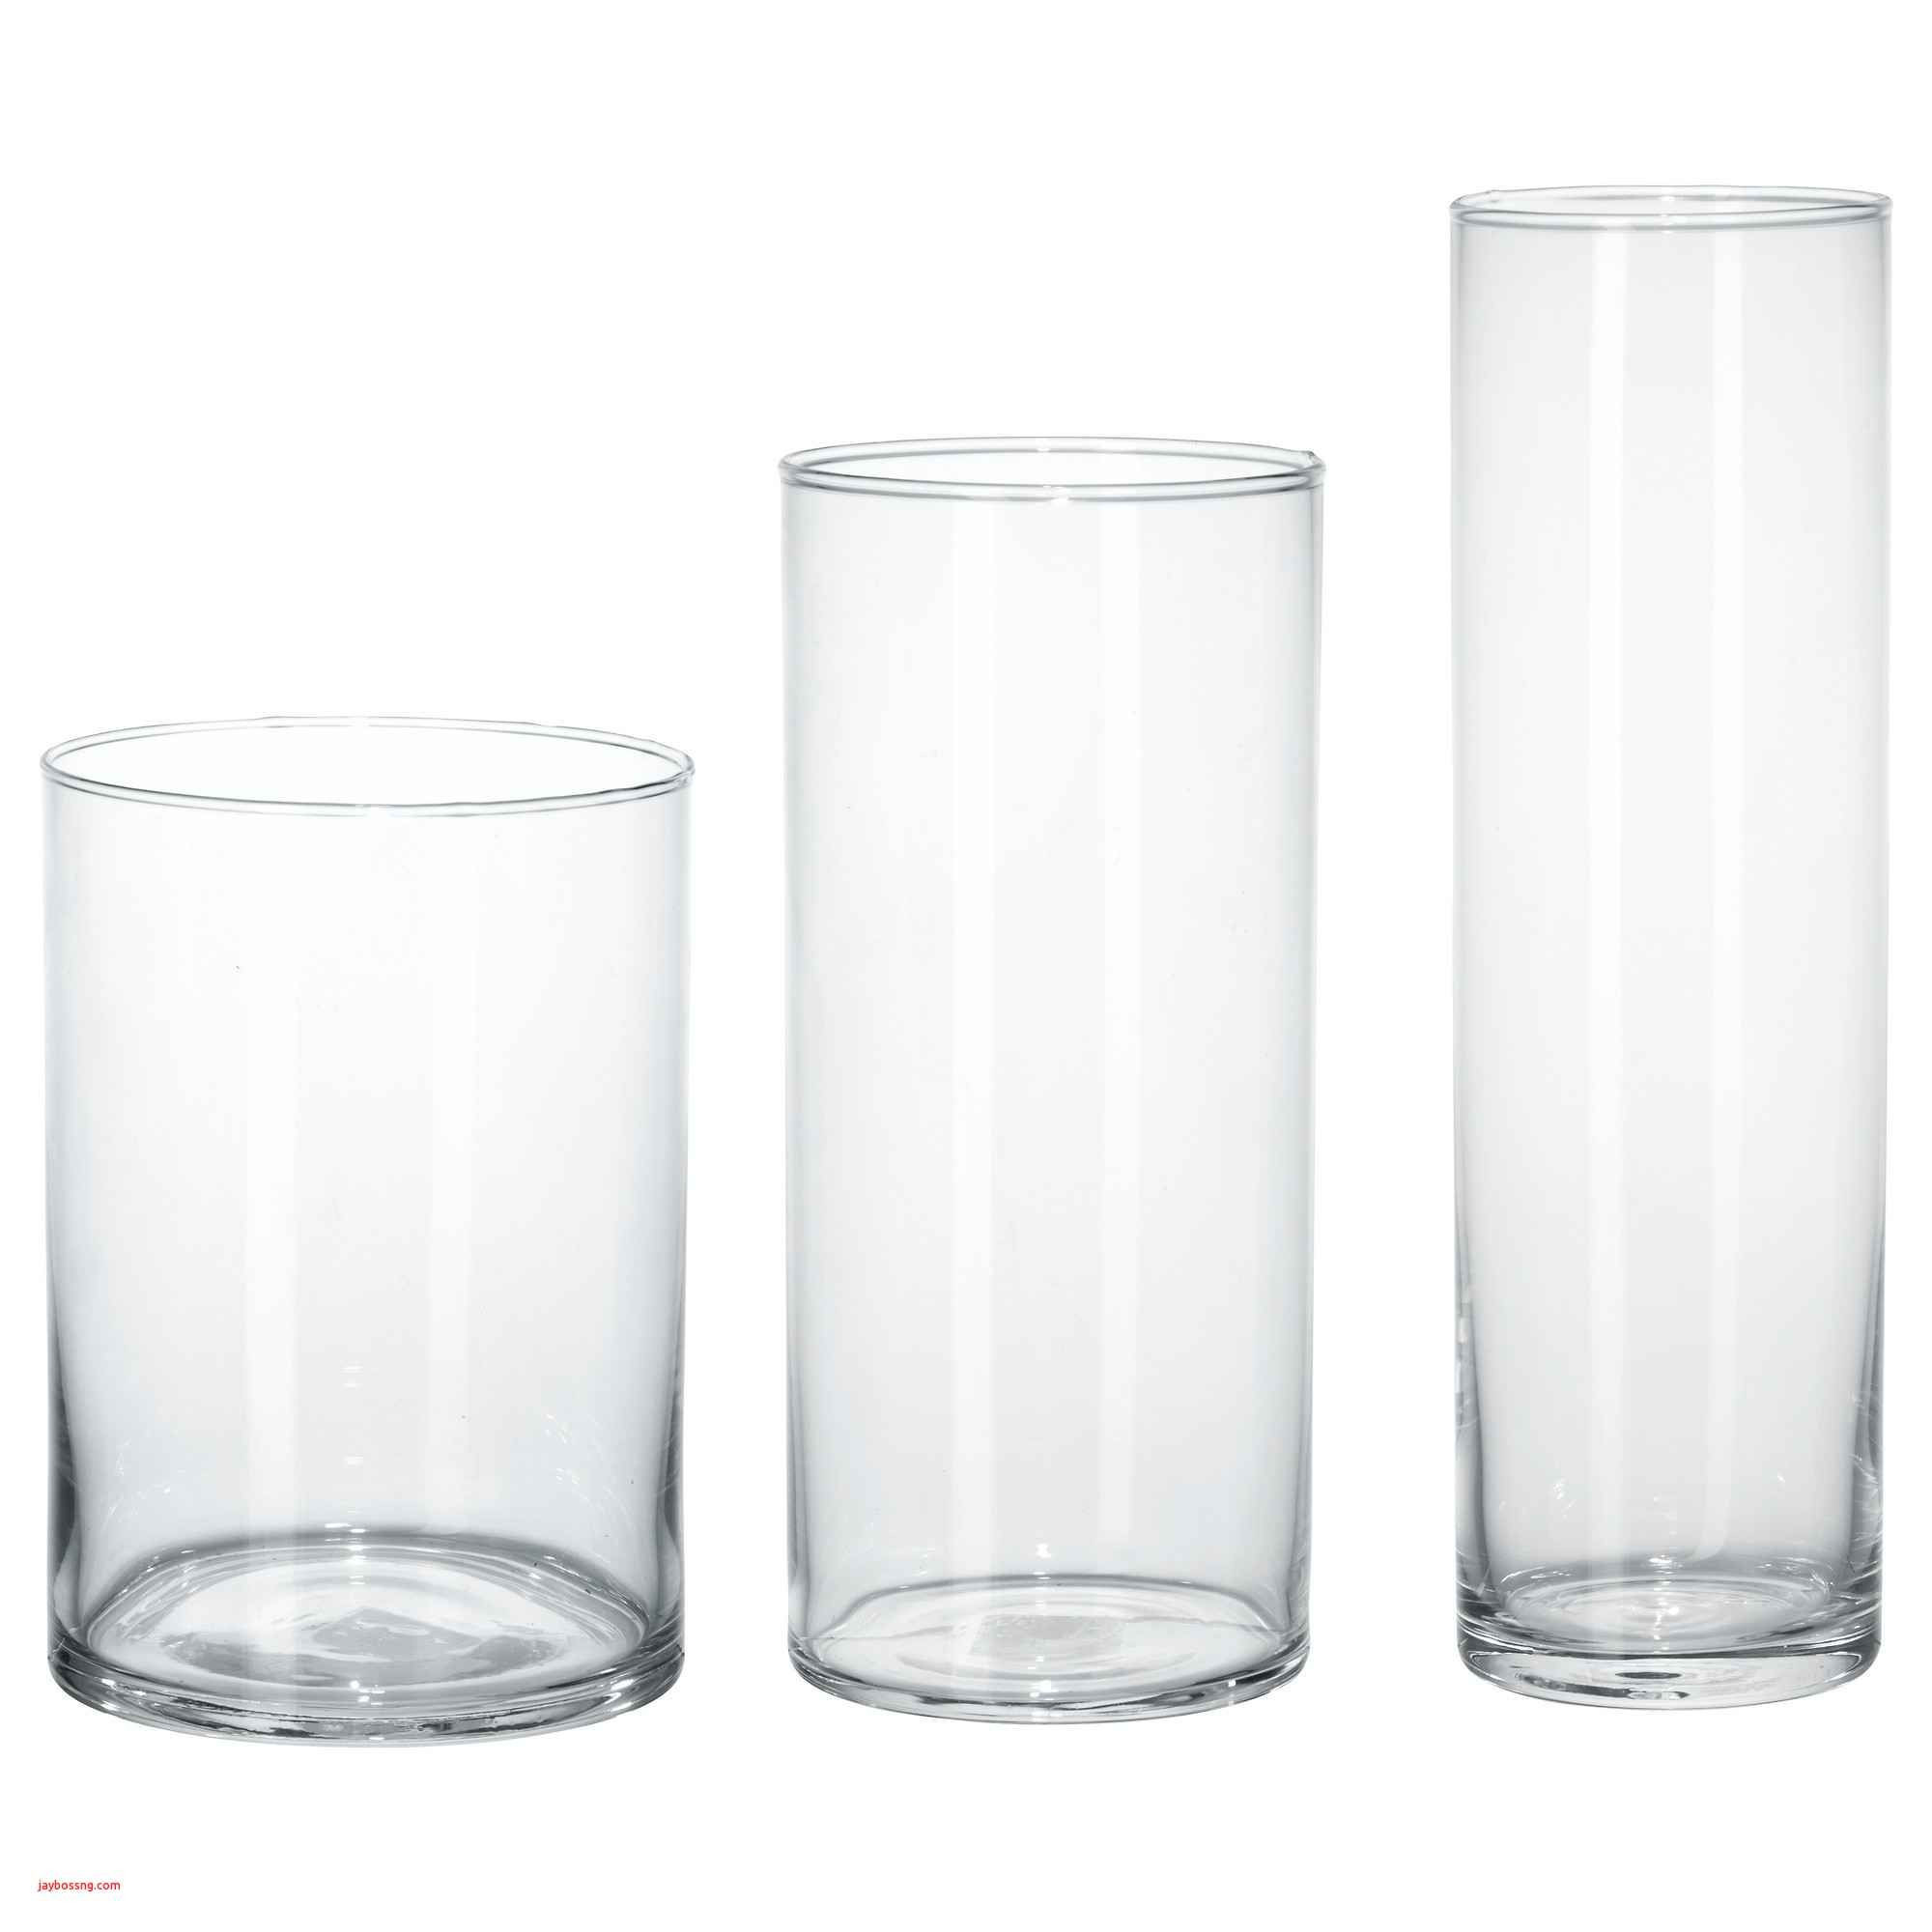 12 Fashionable Amber Glass Vase 2024 free download amber glass vase of brown glass vase fresh ikea white table created pe s5h vases ikea with brown glass vase fresh ikea white table created pe s5h vases ikea vase i 0d bladet